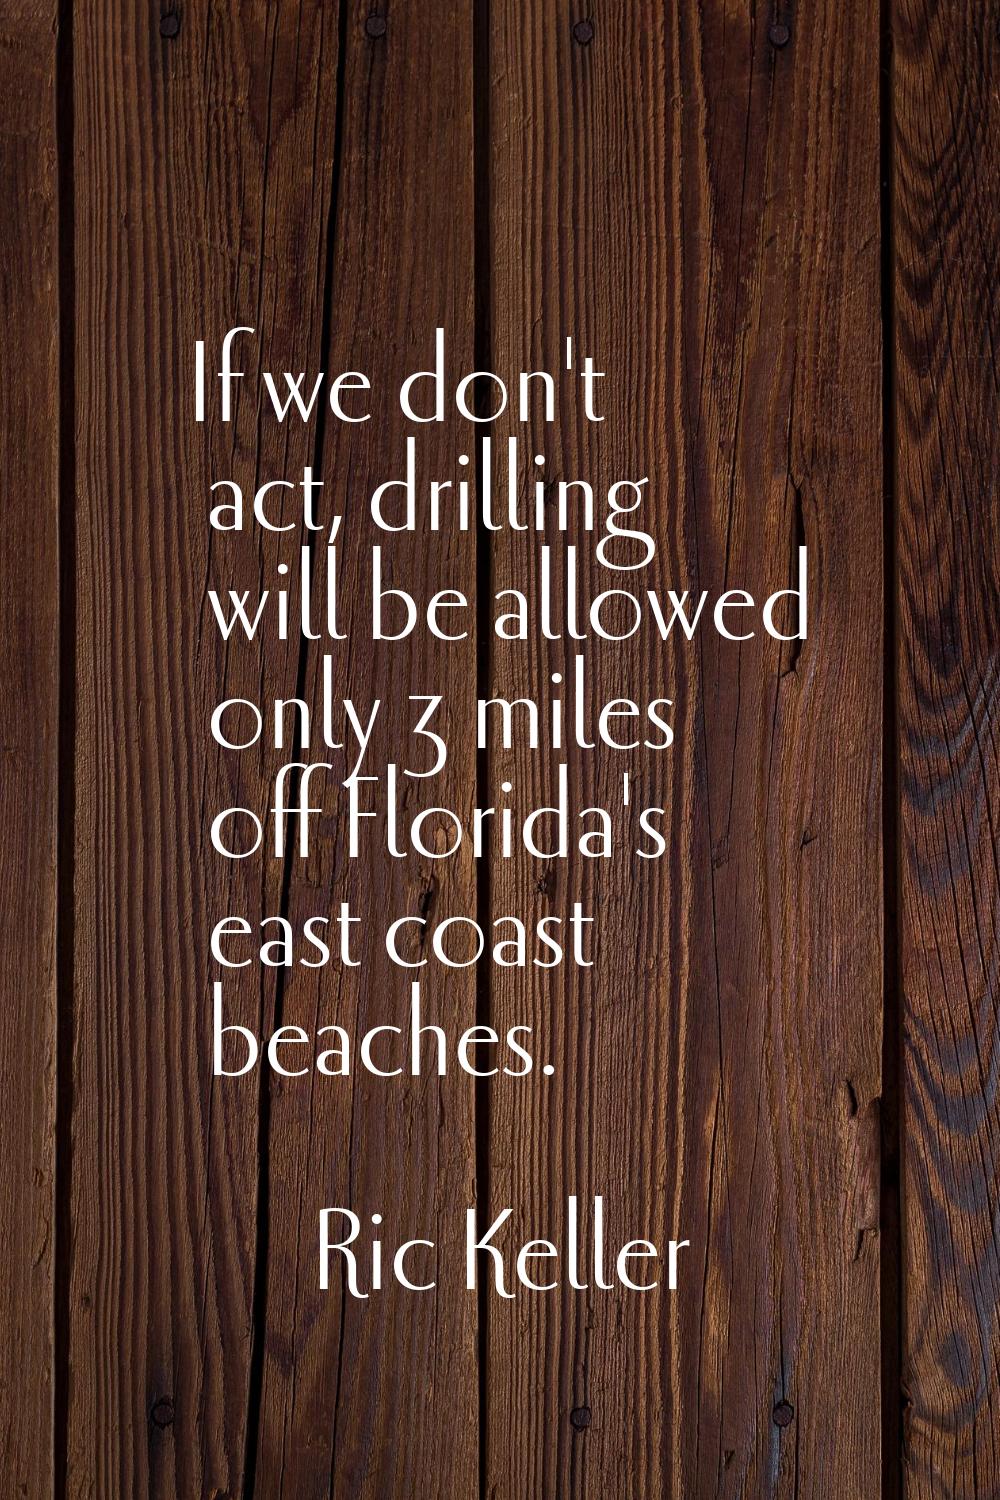 If we don't act, drilling will be allowed only 3 miles off Florida's east coast beaches.